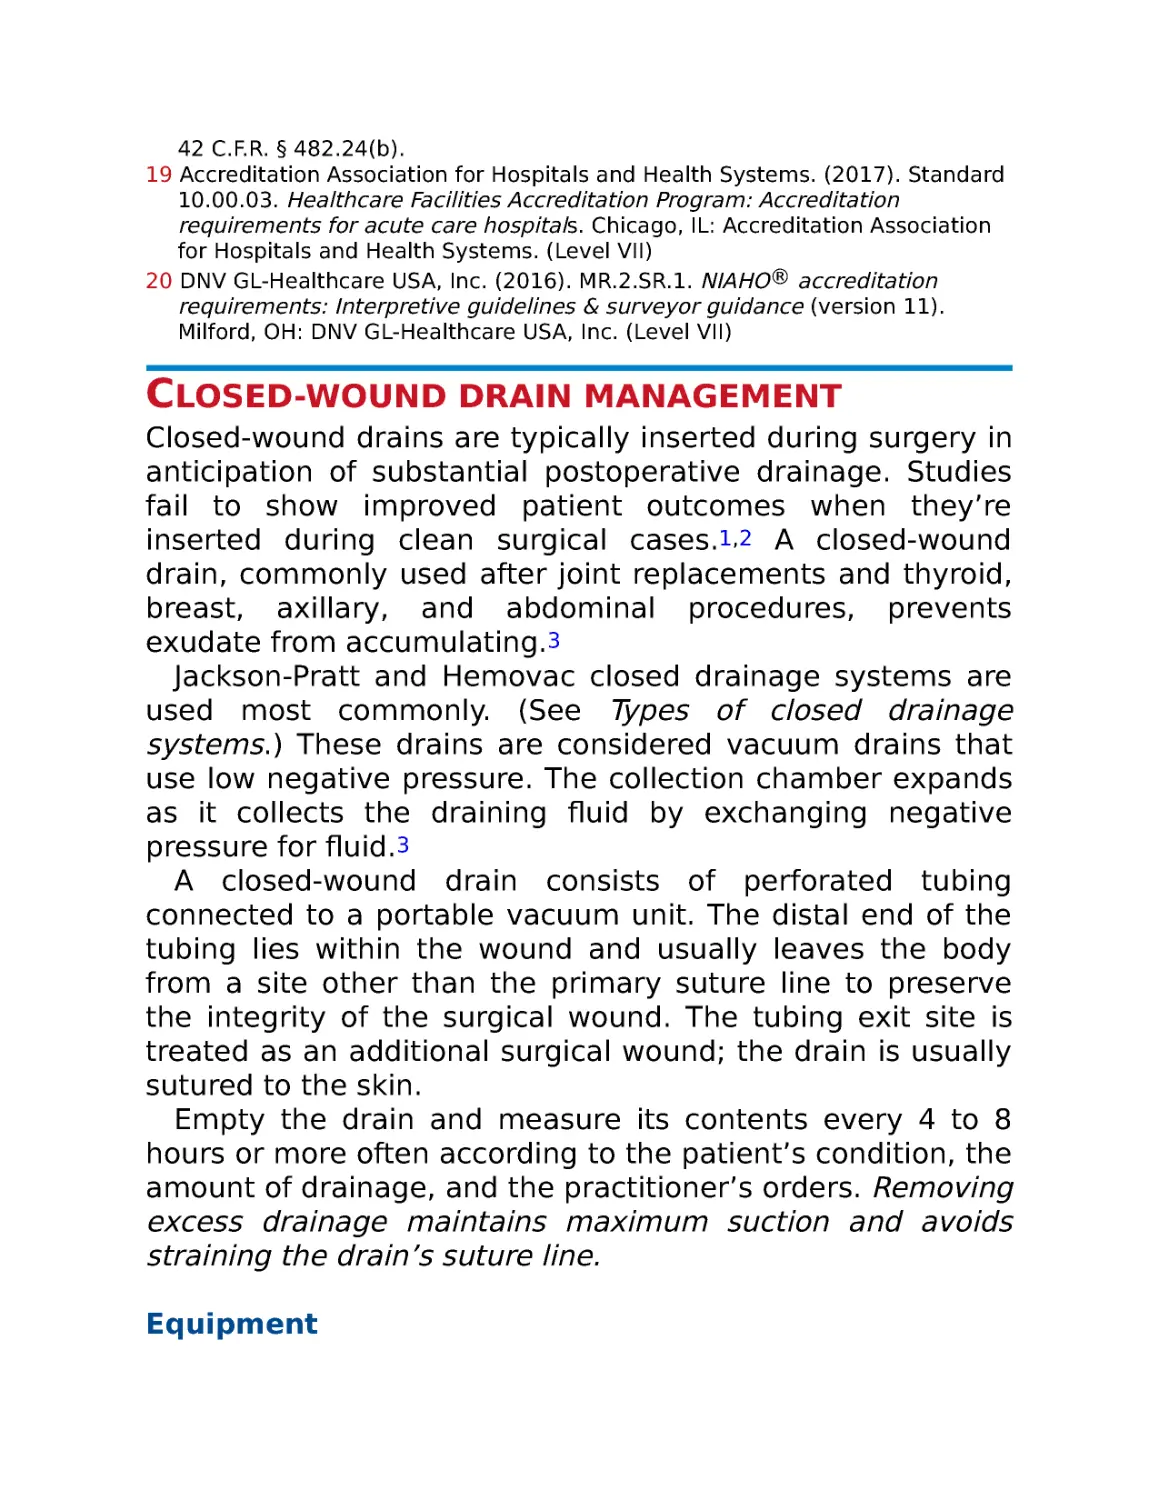 Closed-wound drain management